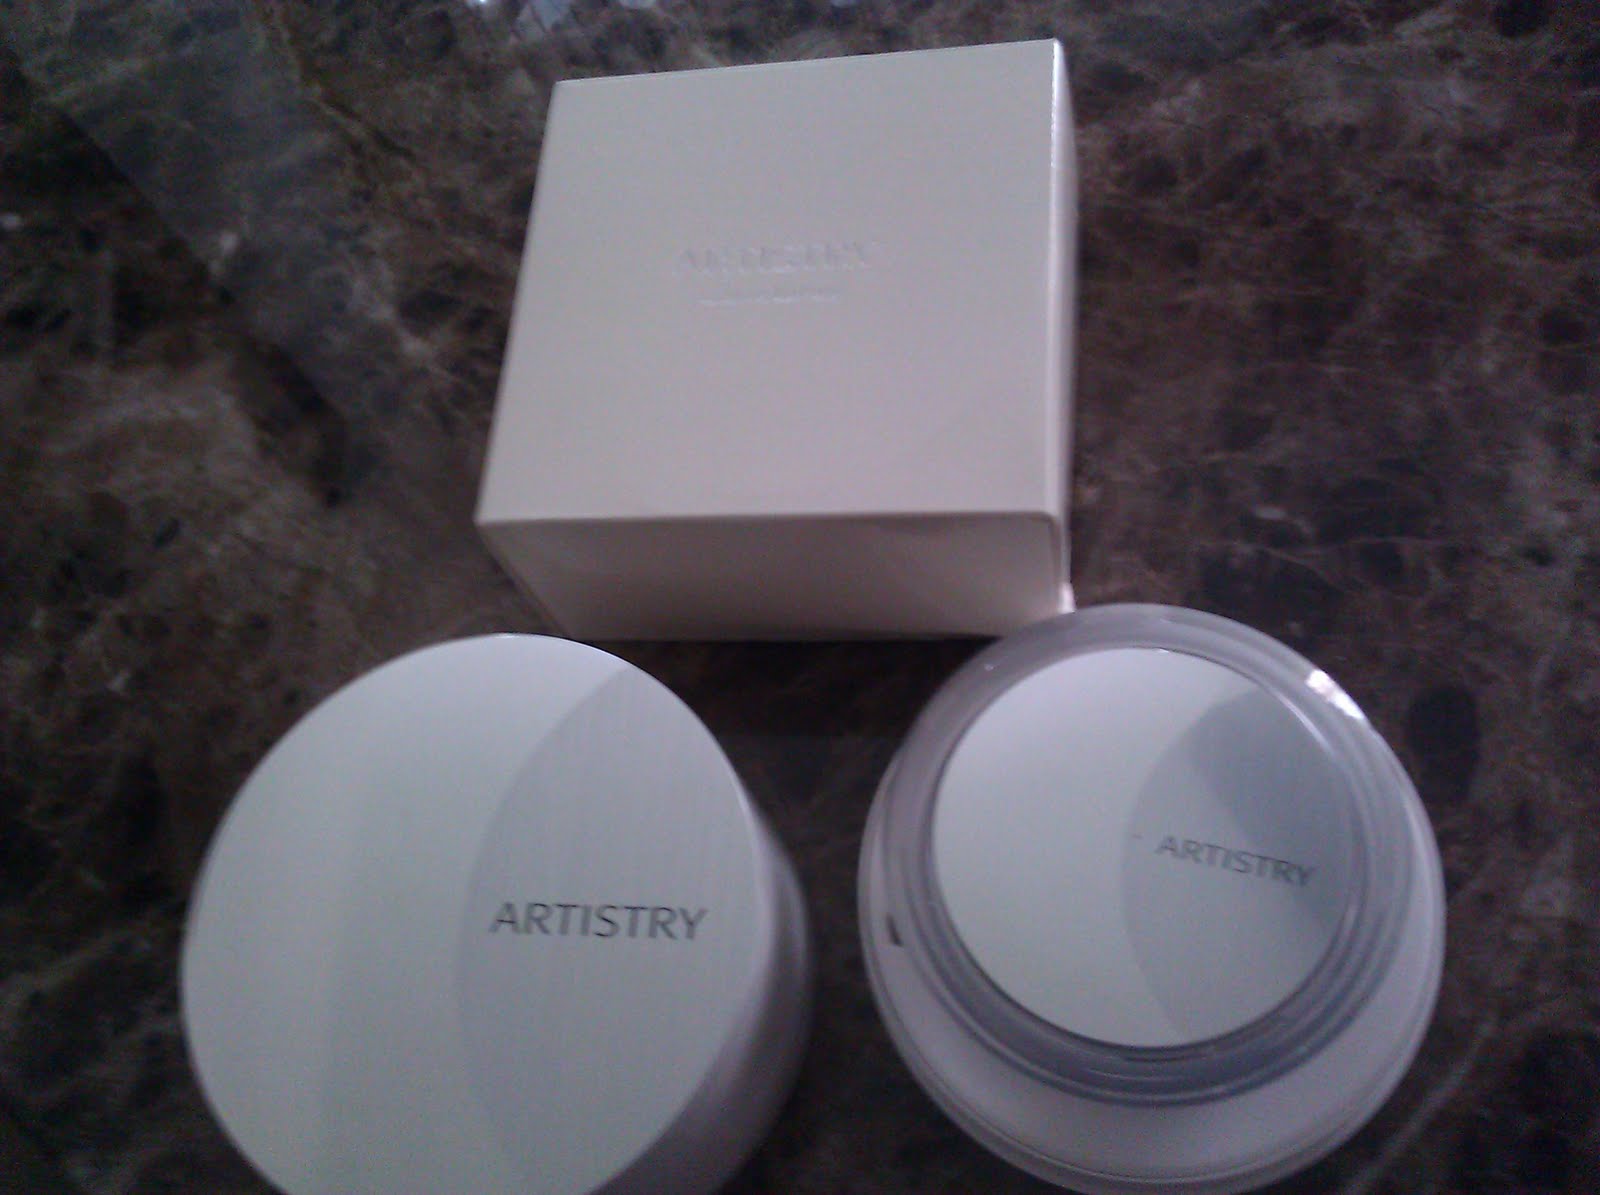 Opinii de produse cosmetice beautycycle, amway